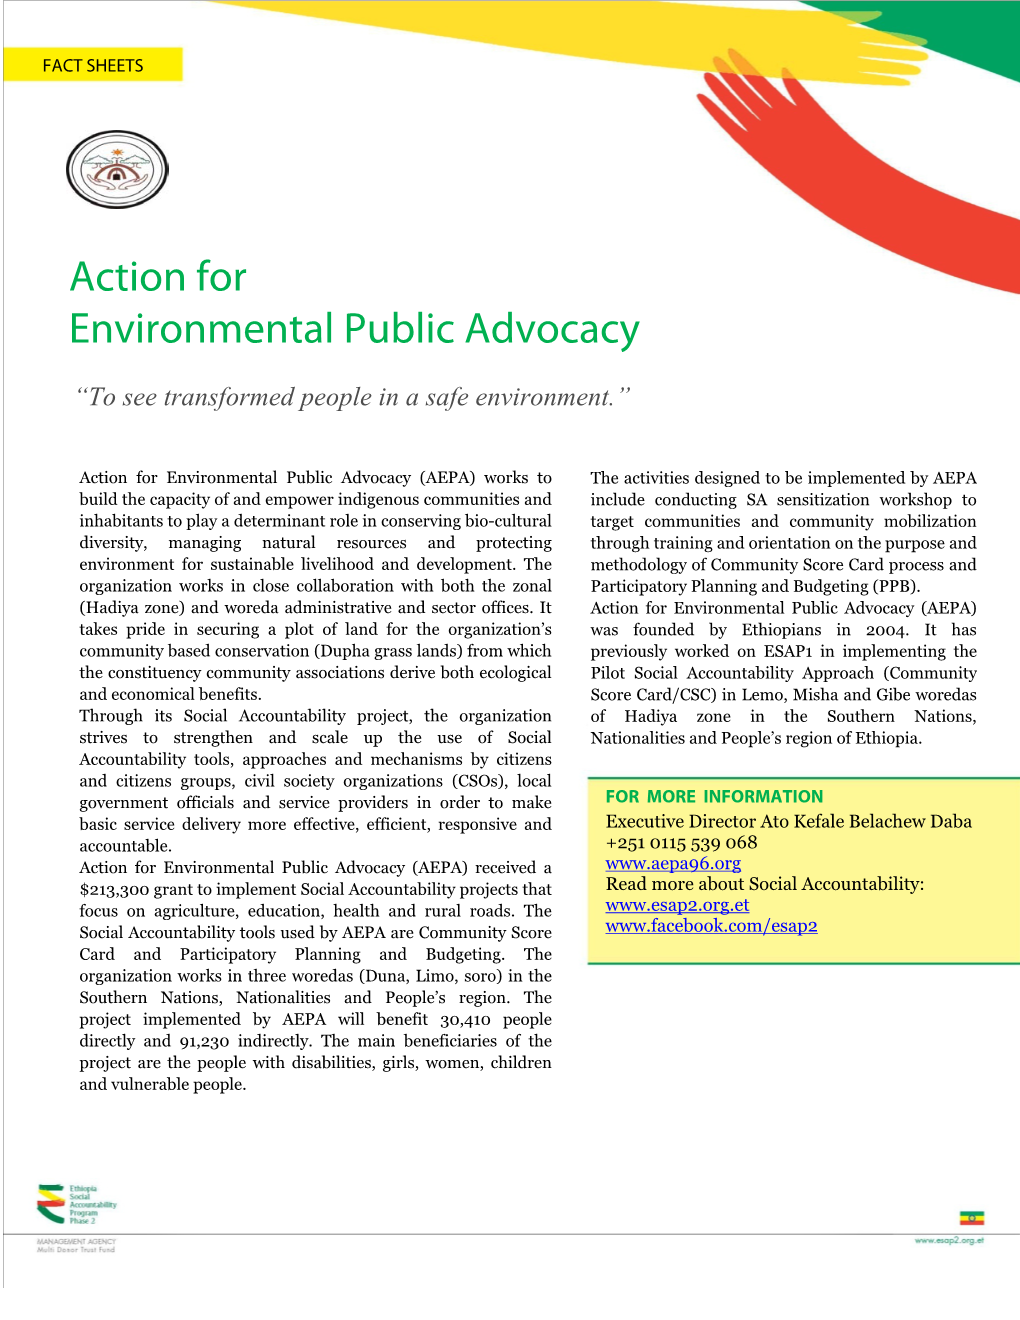 Action for Environmental Public Advocacy